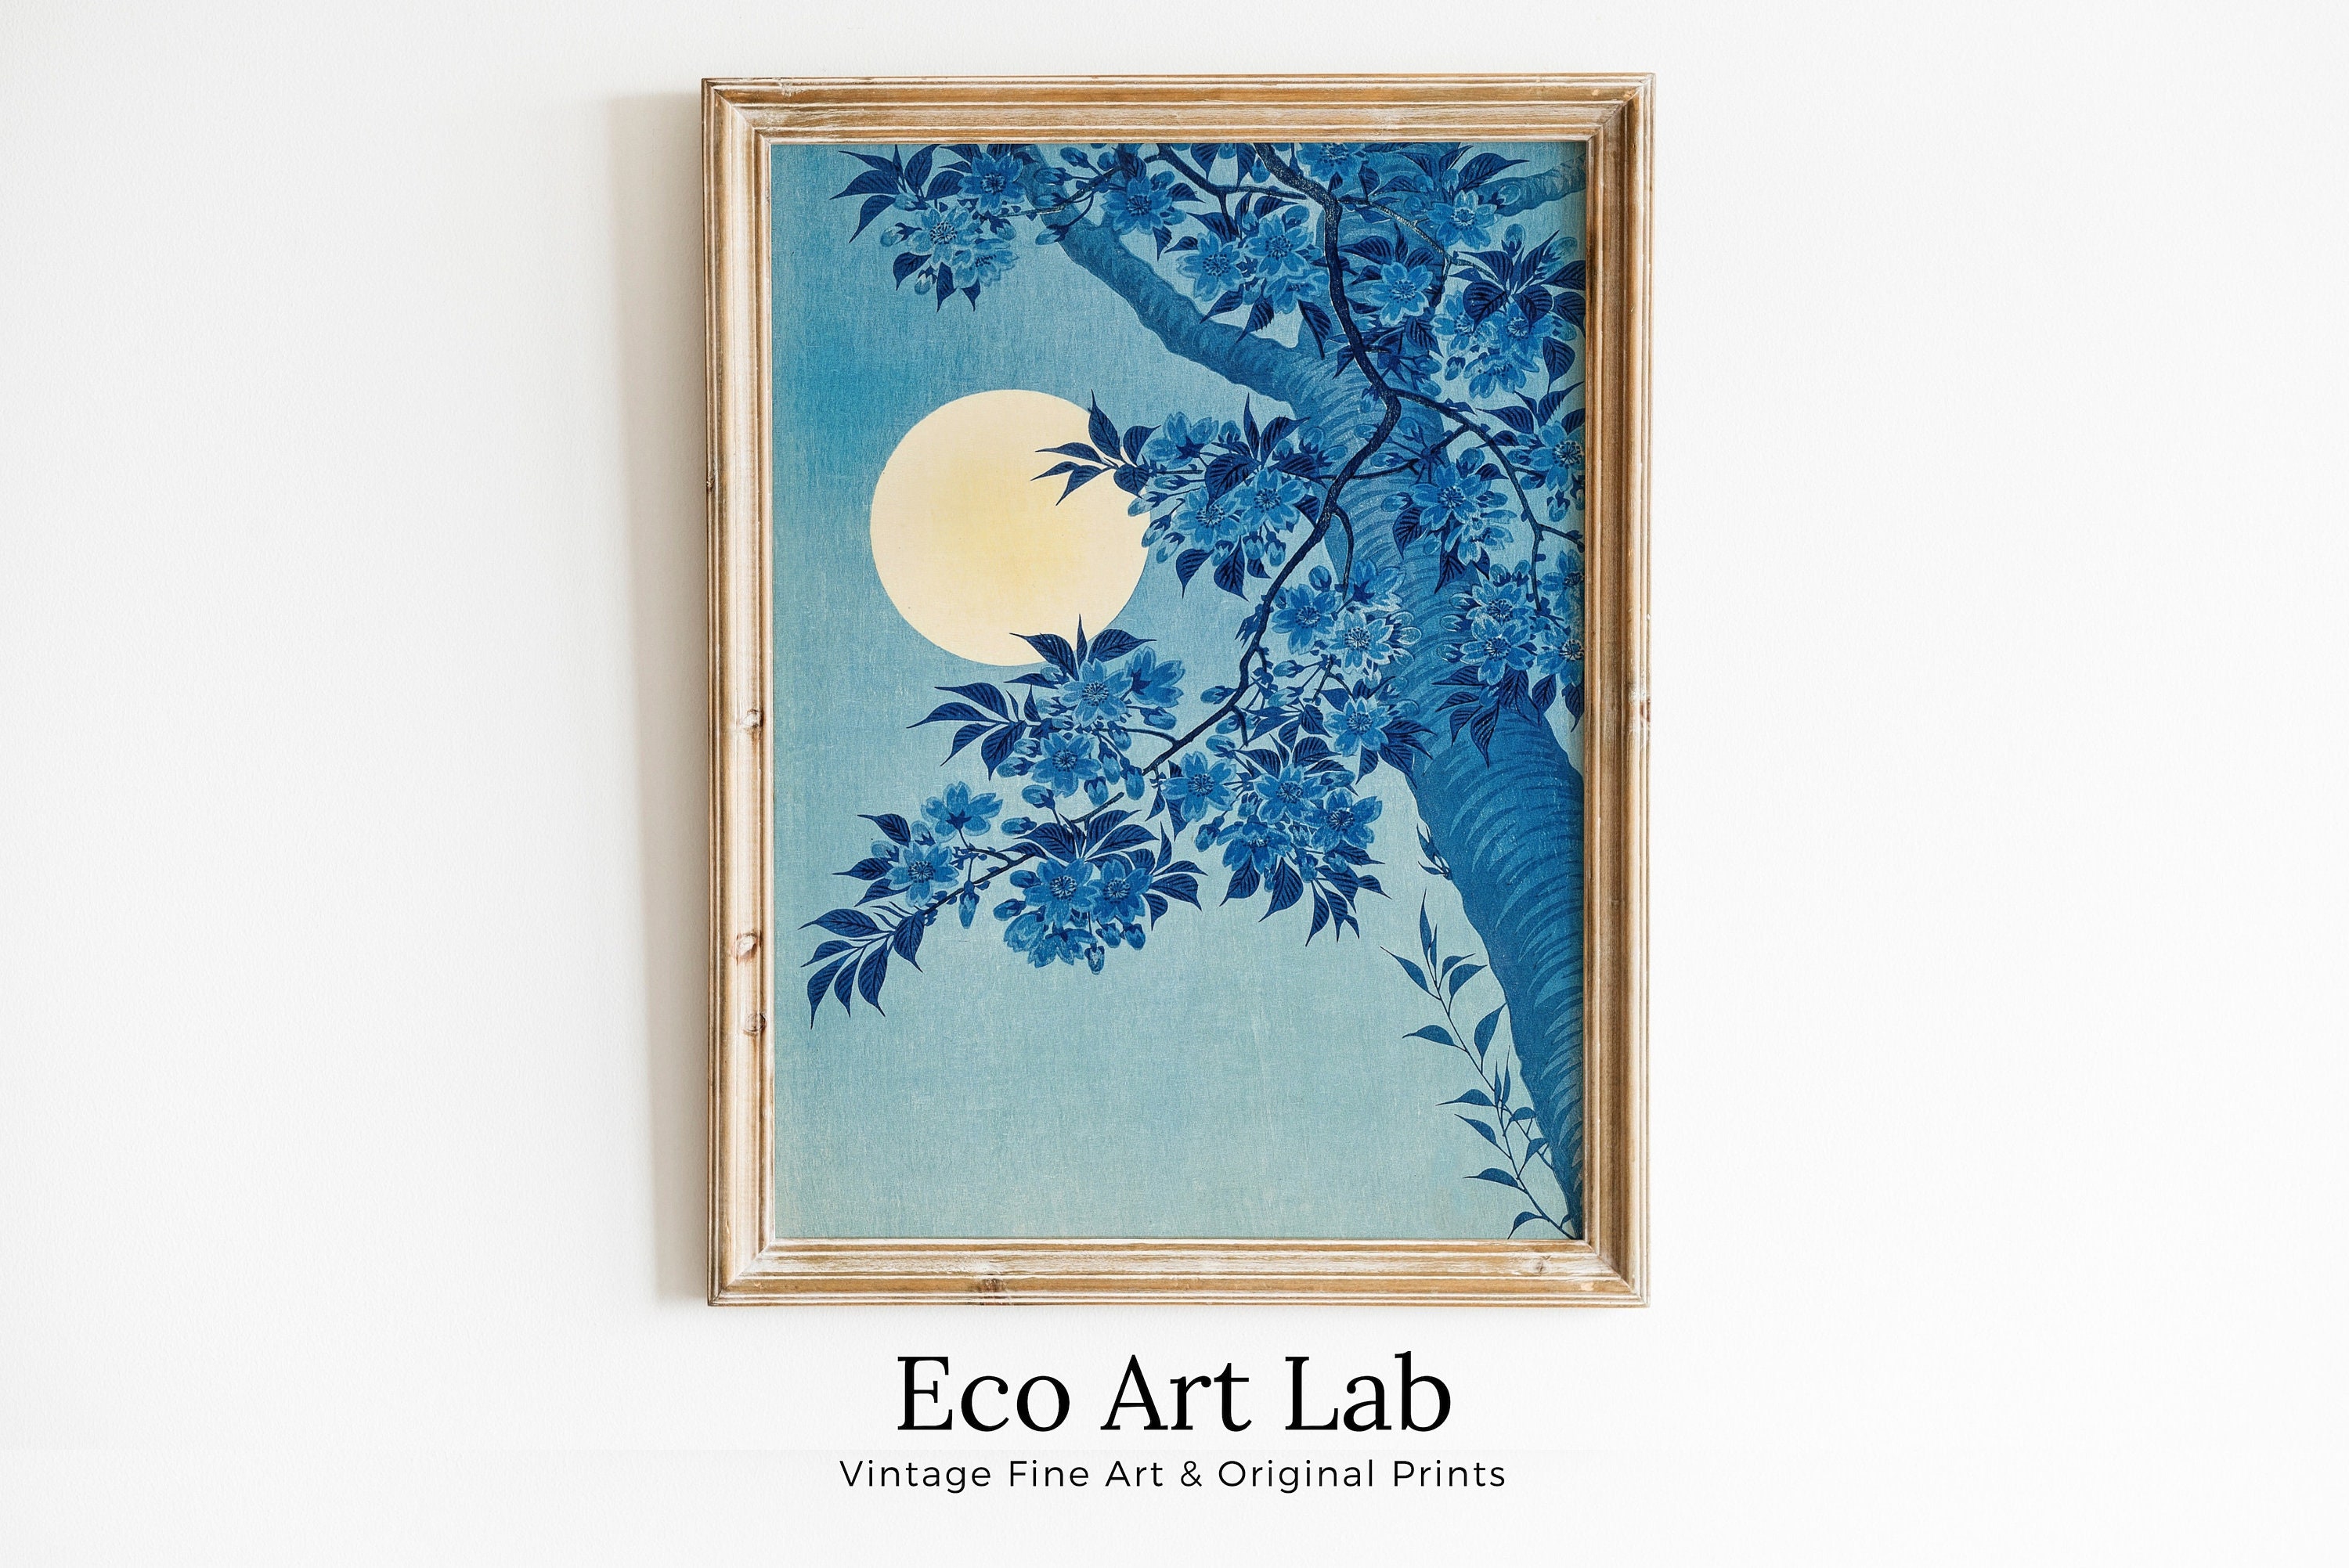 Cherry and Vintage Japanese Printable Floral Art. Print Etsy Painting Japanese - Decor Wall Blossoming Blue Art. Antique Botanical Wall Moon Full